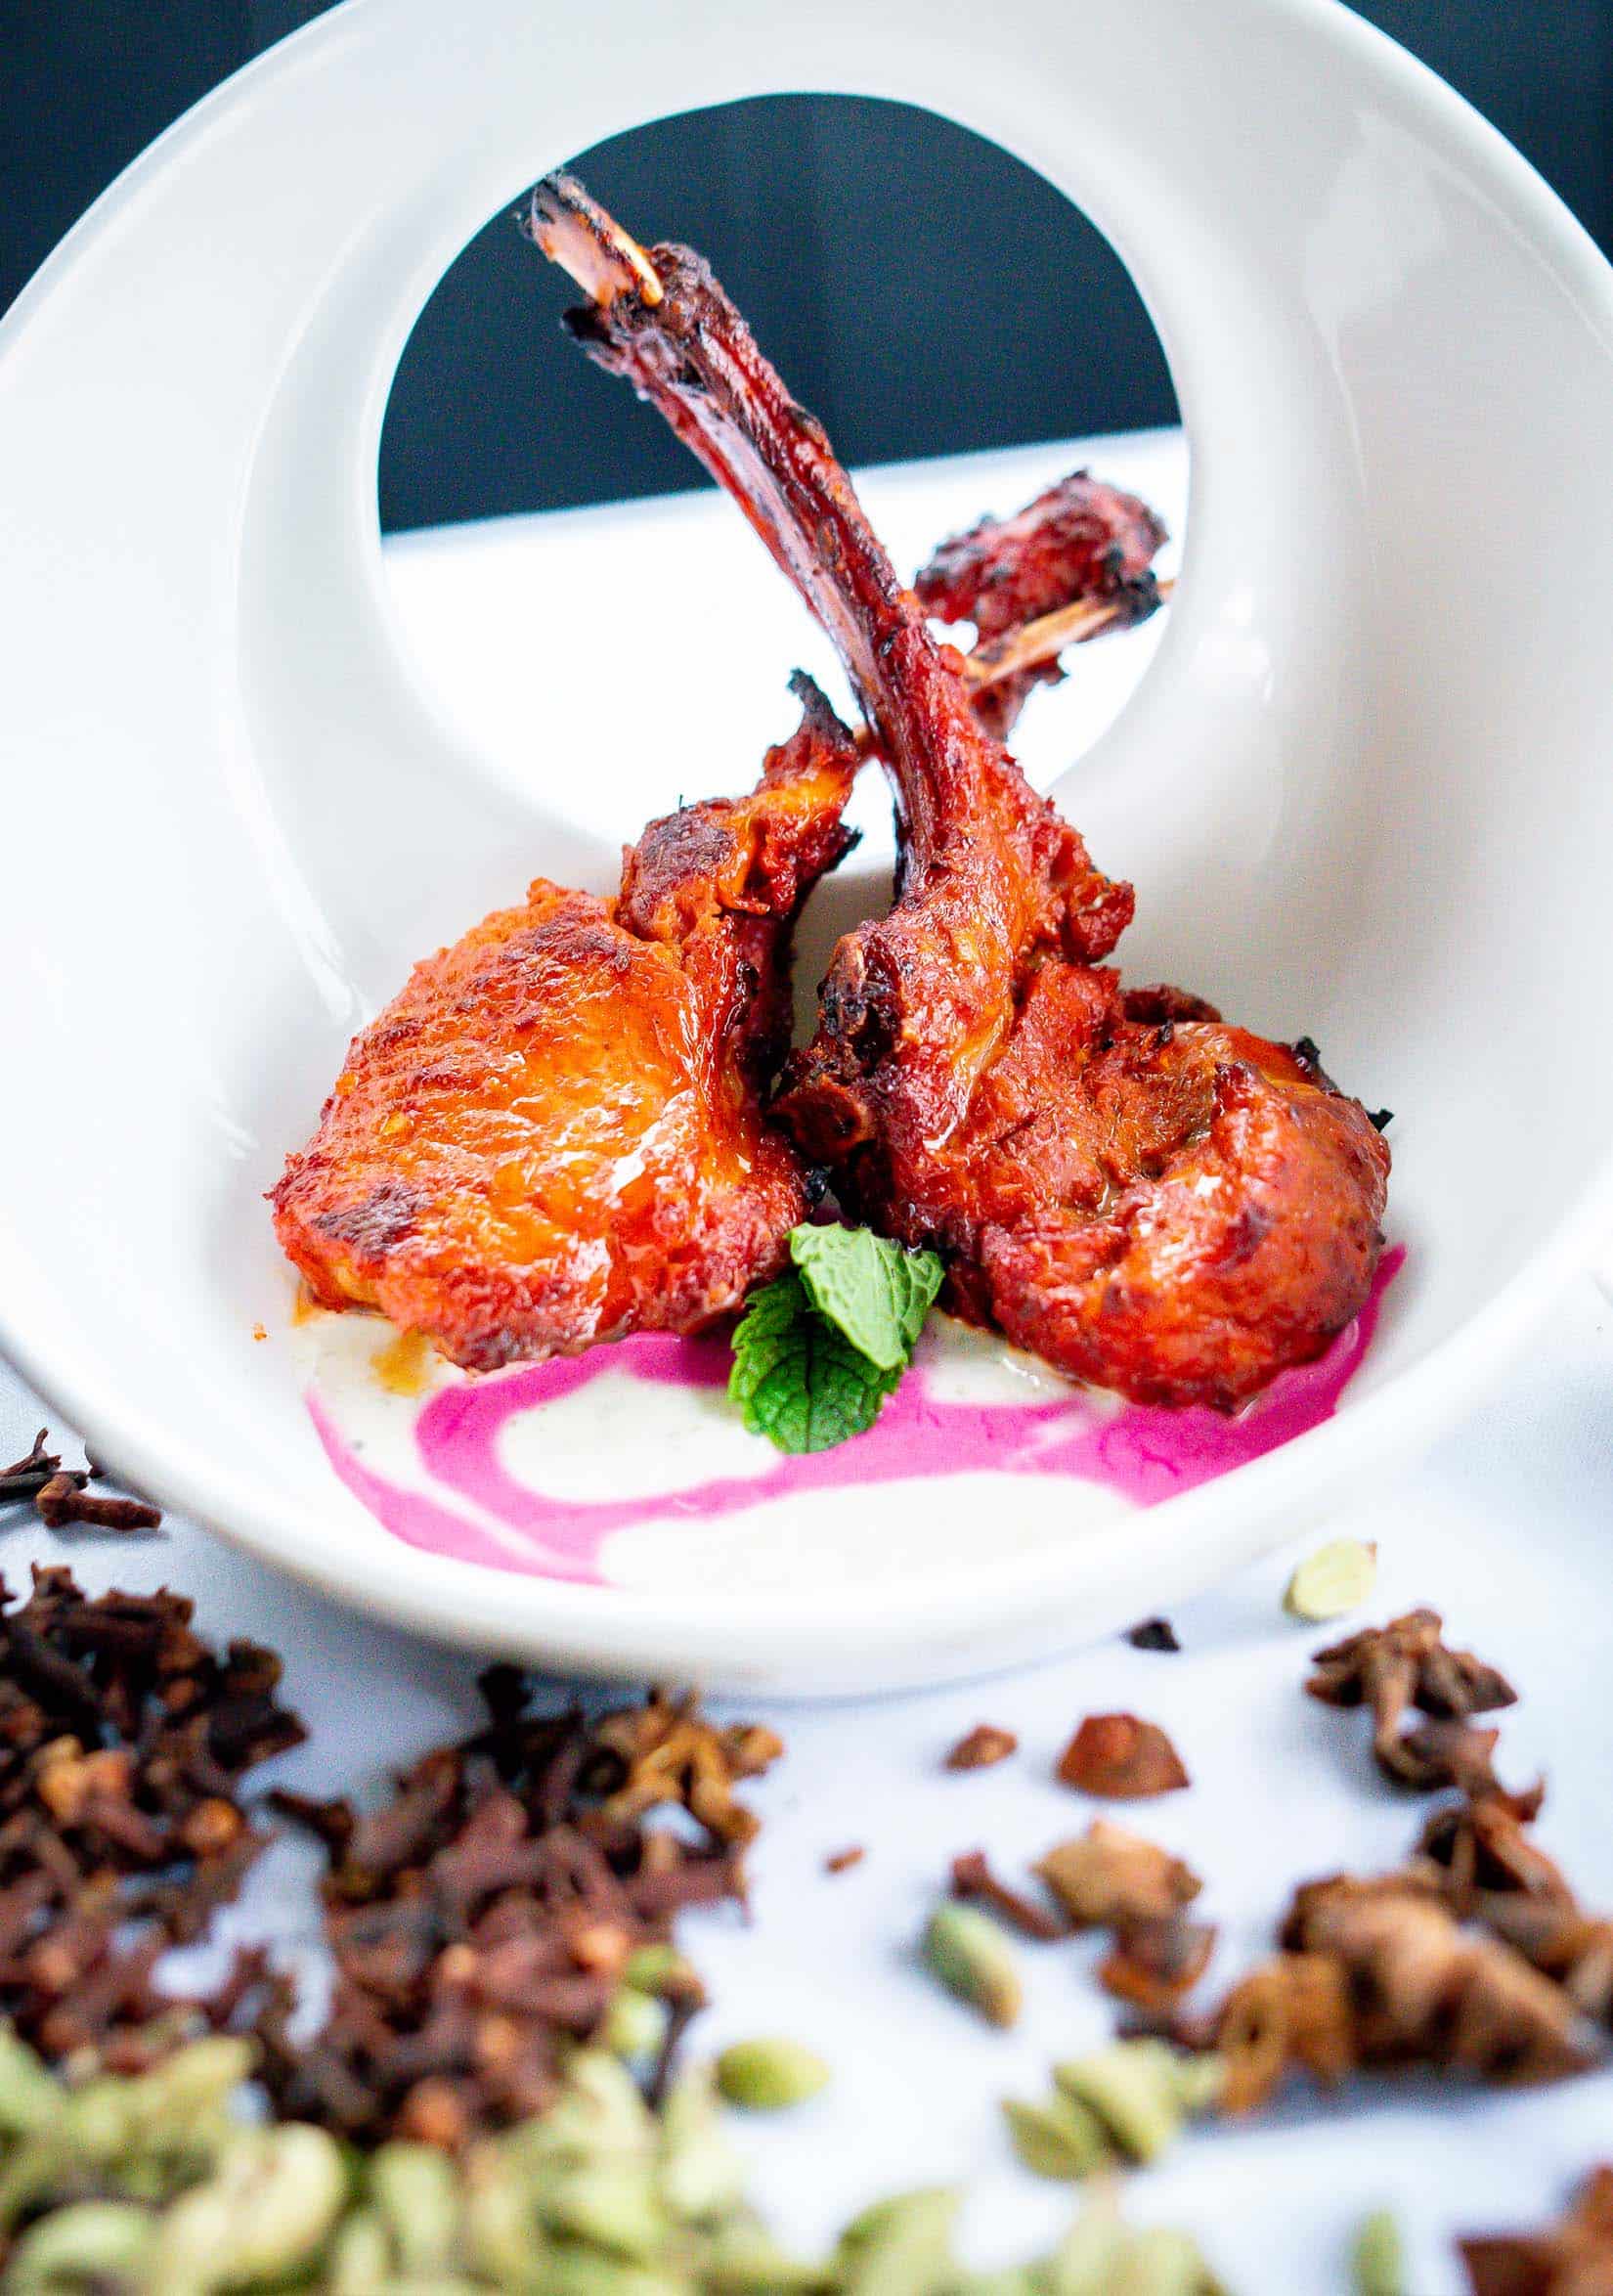 Exquisite presentation of Lamb Cutlets, a specialty dish at Manjits, artistically plated to emphasize the rich flavors and textures unique to this Indian culinary delight